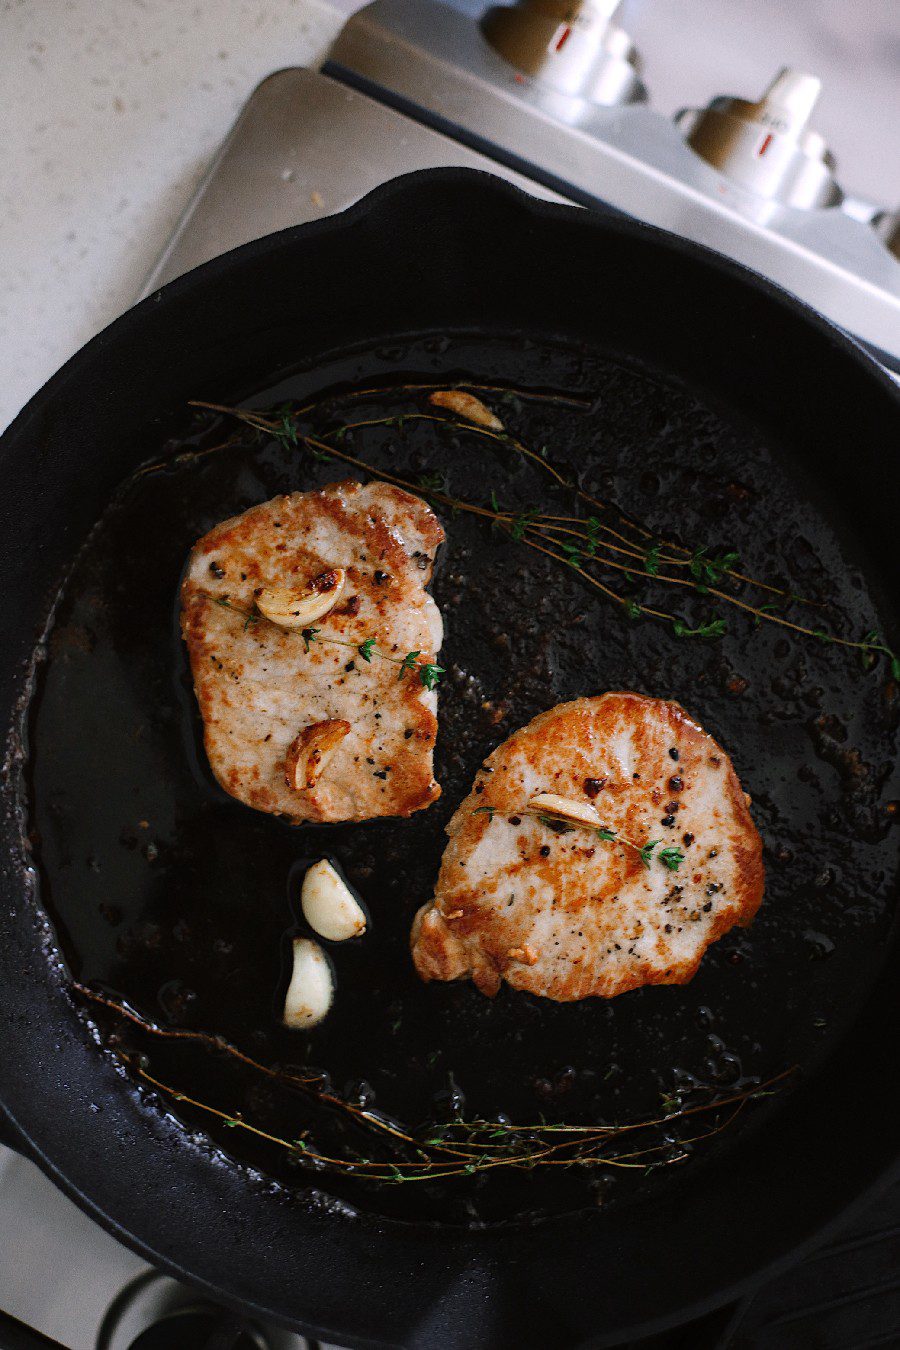 How To Cook Tender Skillet Pork Chops in the Oven What if I told you we figured out how to make sure to get those tender, juicy skillet pork chops every time, with a quick roast in the oven? Ready to say goodbye to dry, flavorless chops? These tips will have you adding tender pork chops back to your rotation. Try our pork chop recipe with browned butter garlic sauce! | Skillet Pork Chops by popular Florida lifestyle blog, Fresh Mommy Blog: image of a woman cooking skillet pork chops in her kitchen. 